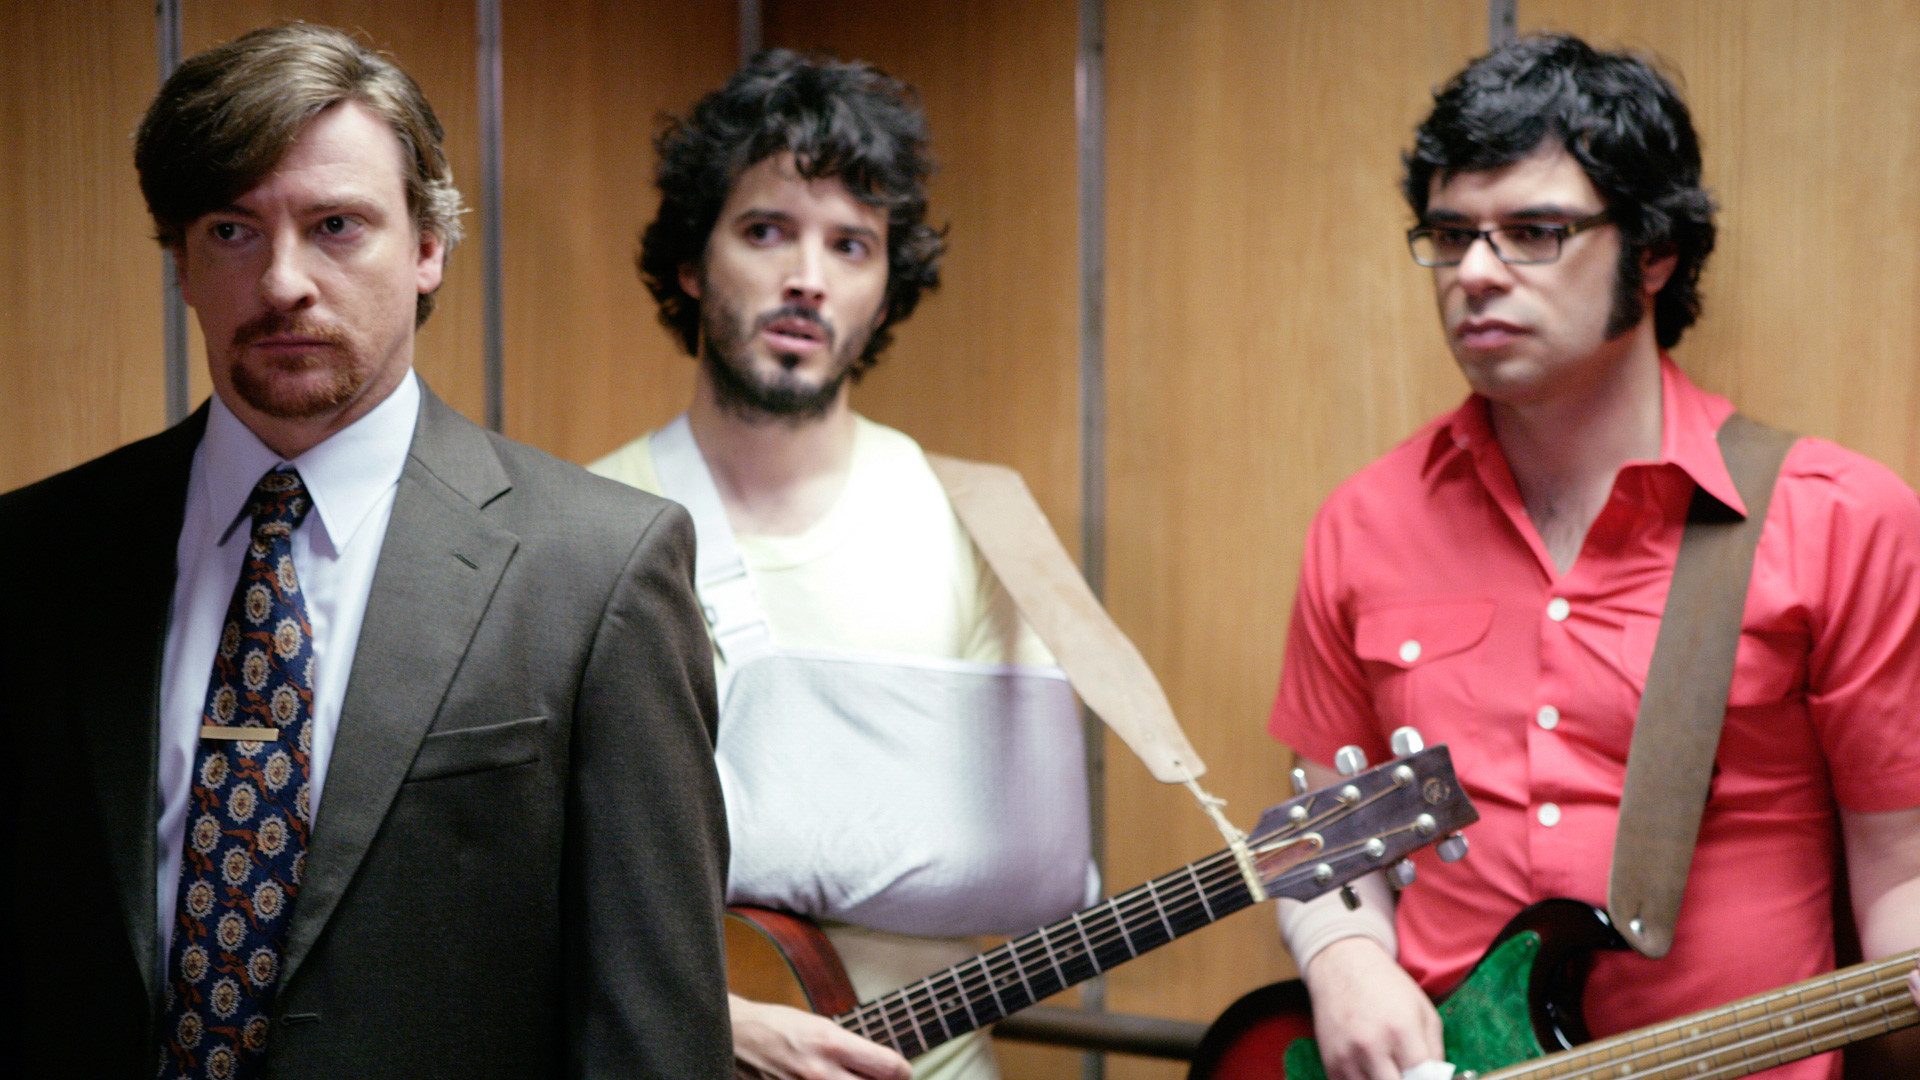 Flight of the Conchords Wallpaper.